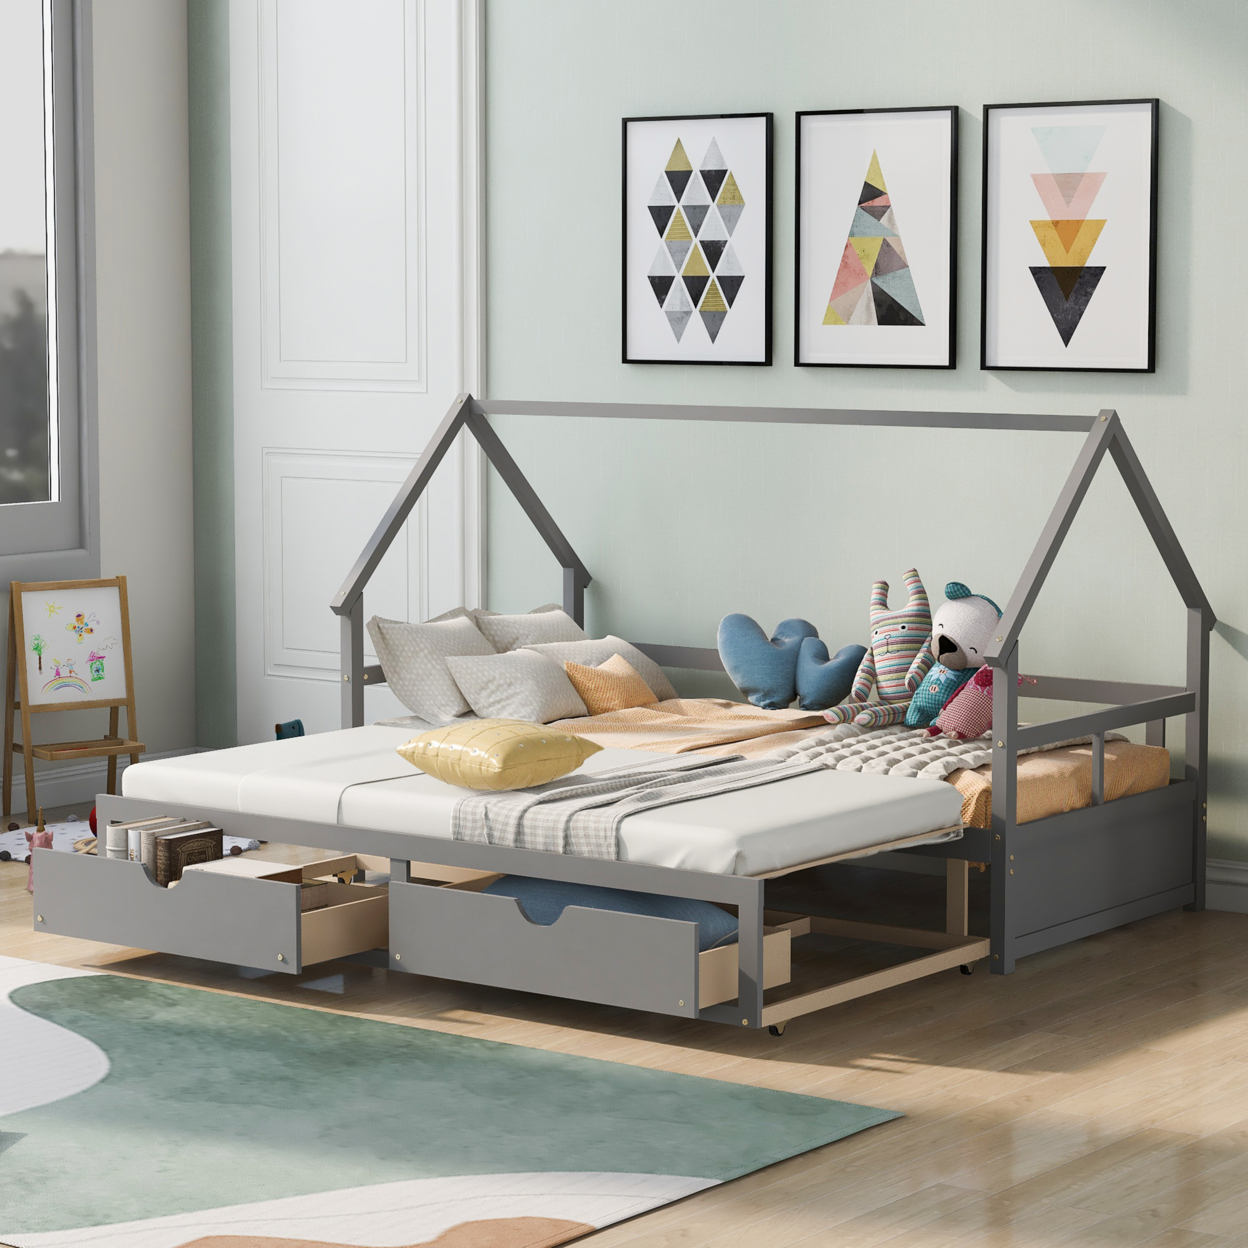 Extending Wooden Daybed with Two Drawers, Gray